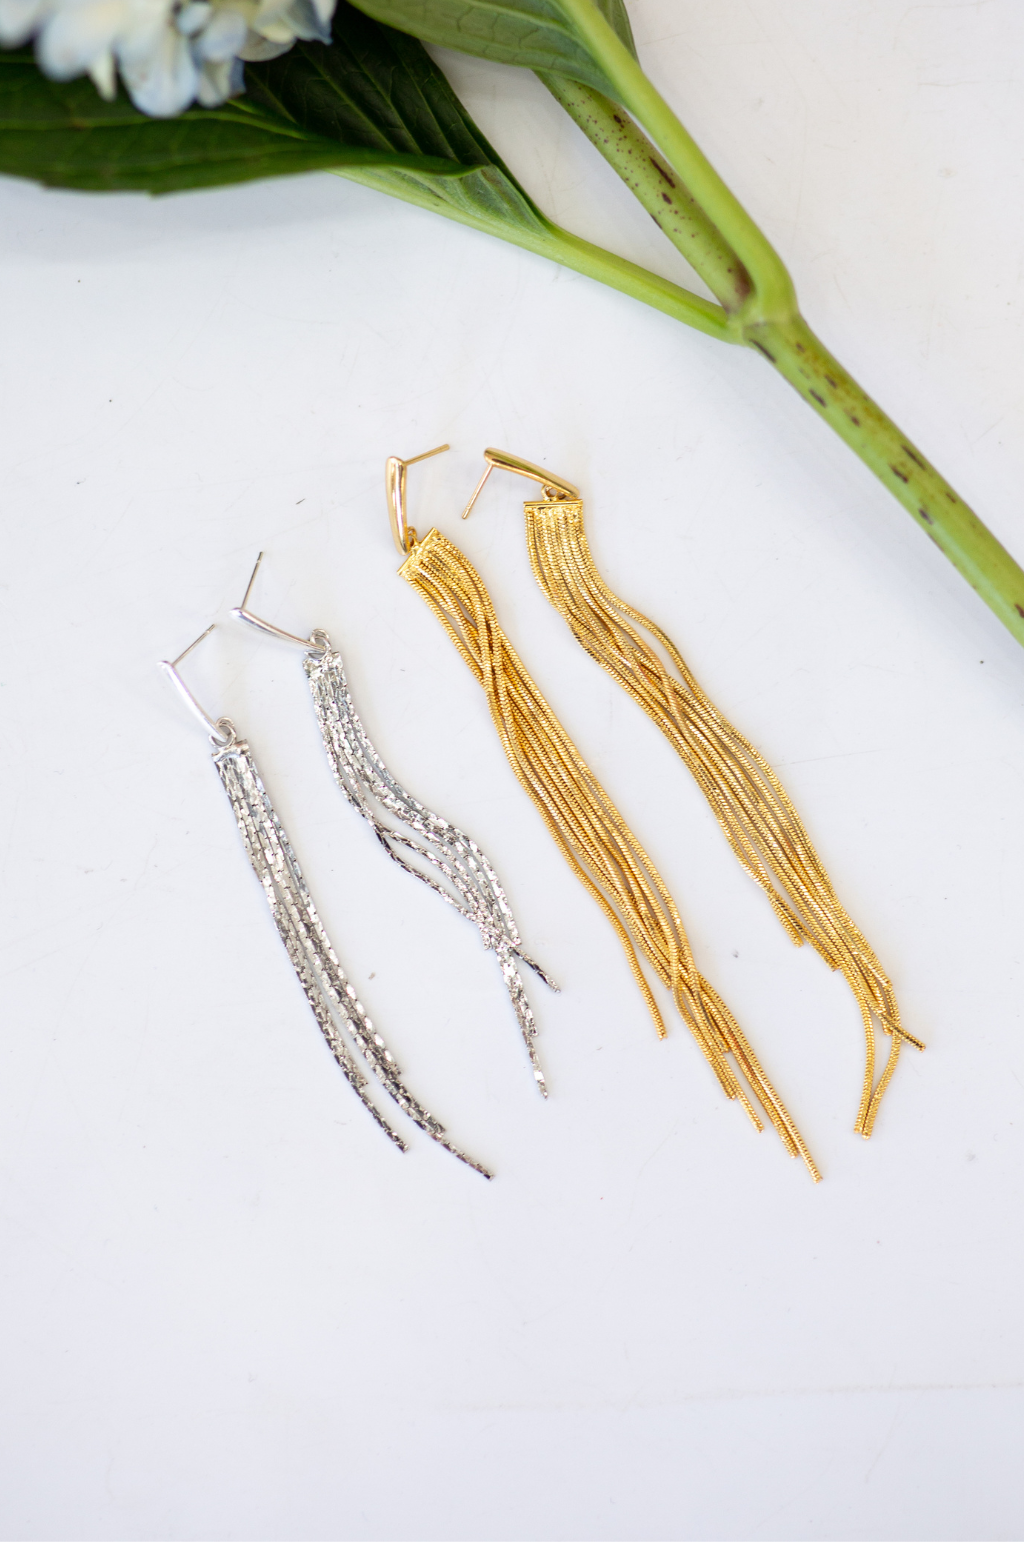 Show Stopper Earrings by Annie Claire Designs - SoSis